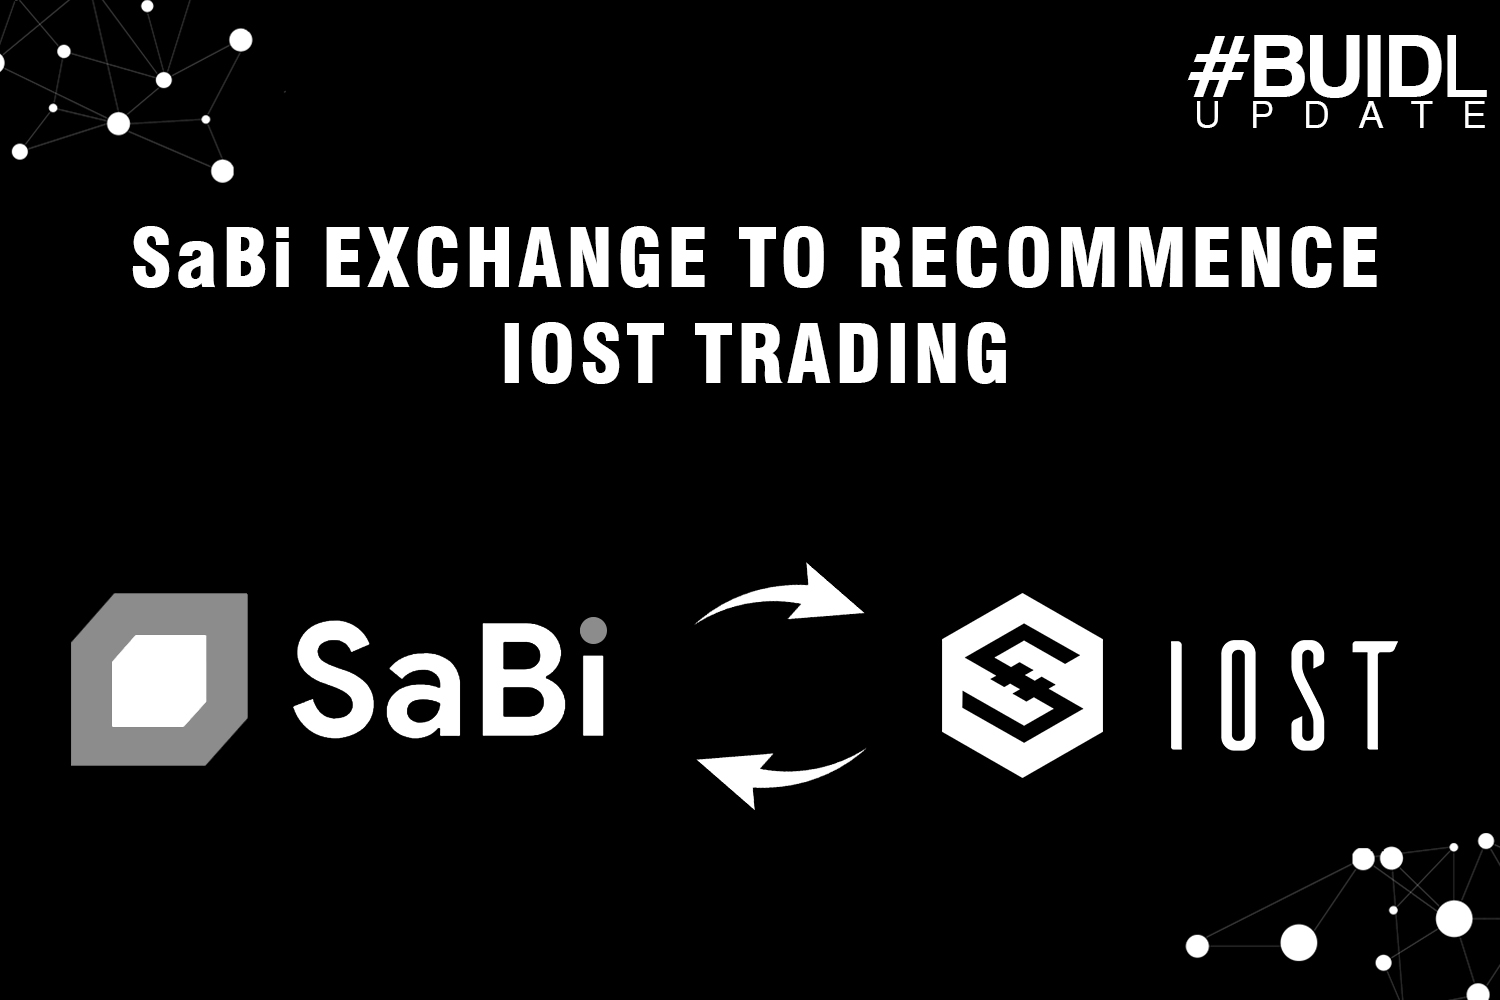 After the IOST, main-net is launched, sabi team will no longer support the deposit and withdrawal of old IOST coins and you can only deposit and withdraw the new coins.